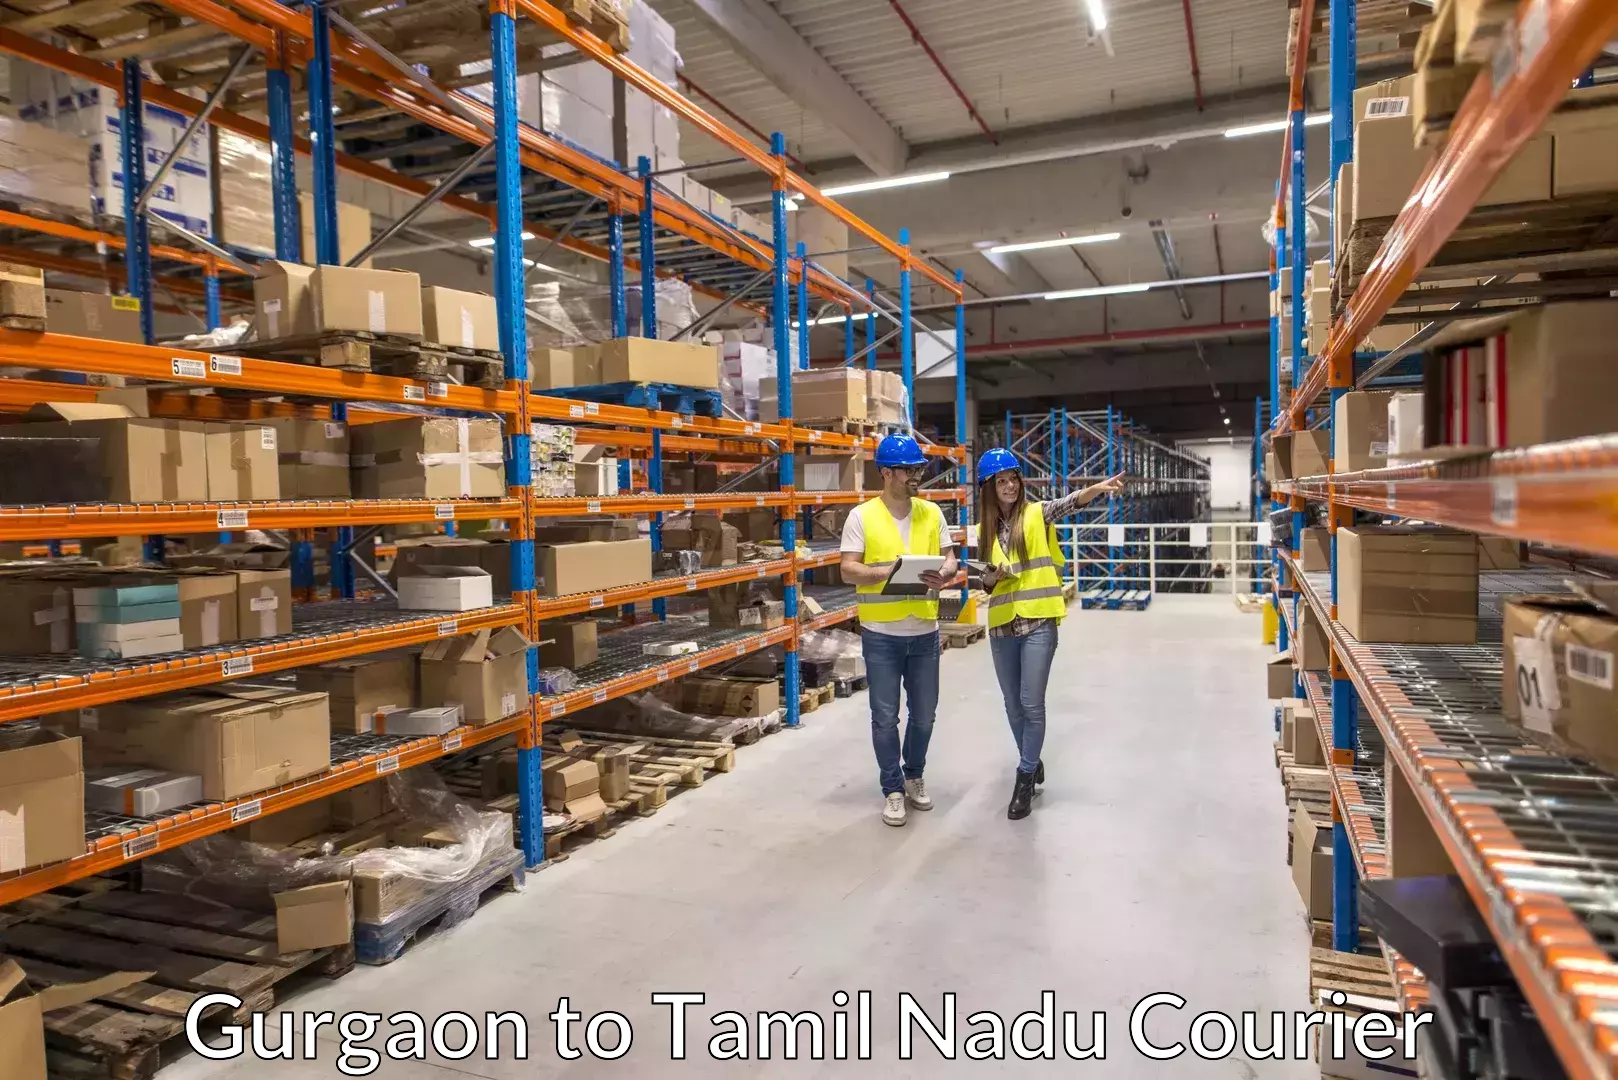 Luggage shipping specialists Gurgaon to Tamil Nadu